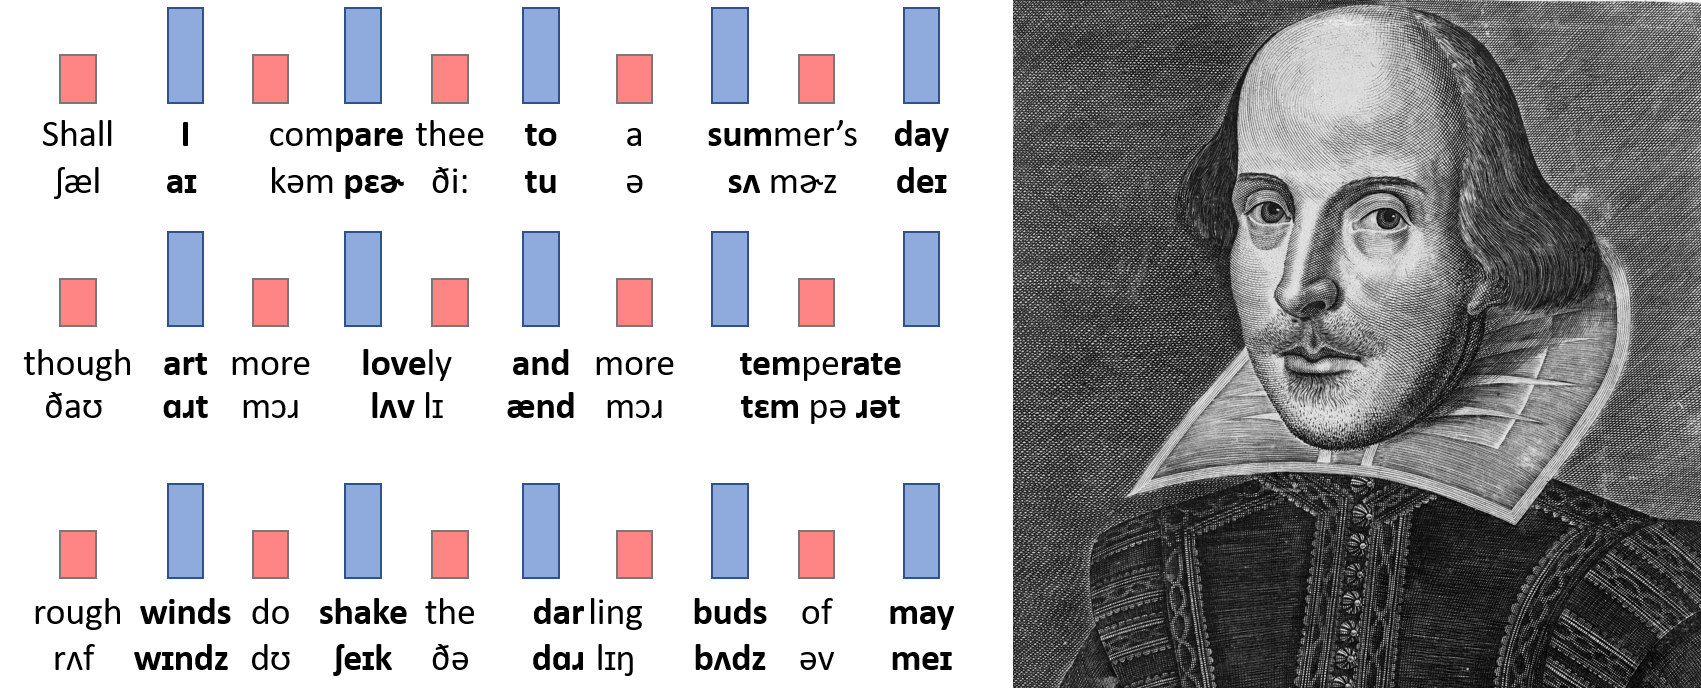 each iamb consisting of two syllables, within a well-known Shakespearian sonnet, illustrating the stress-timed natured of the English language.